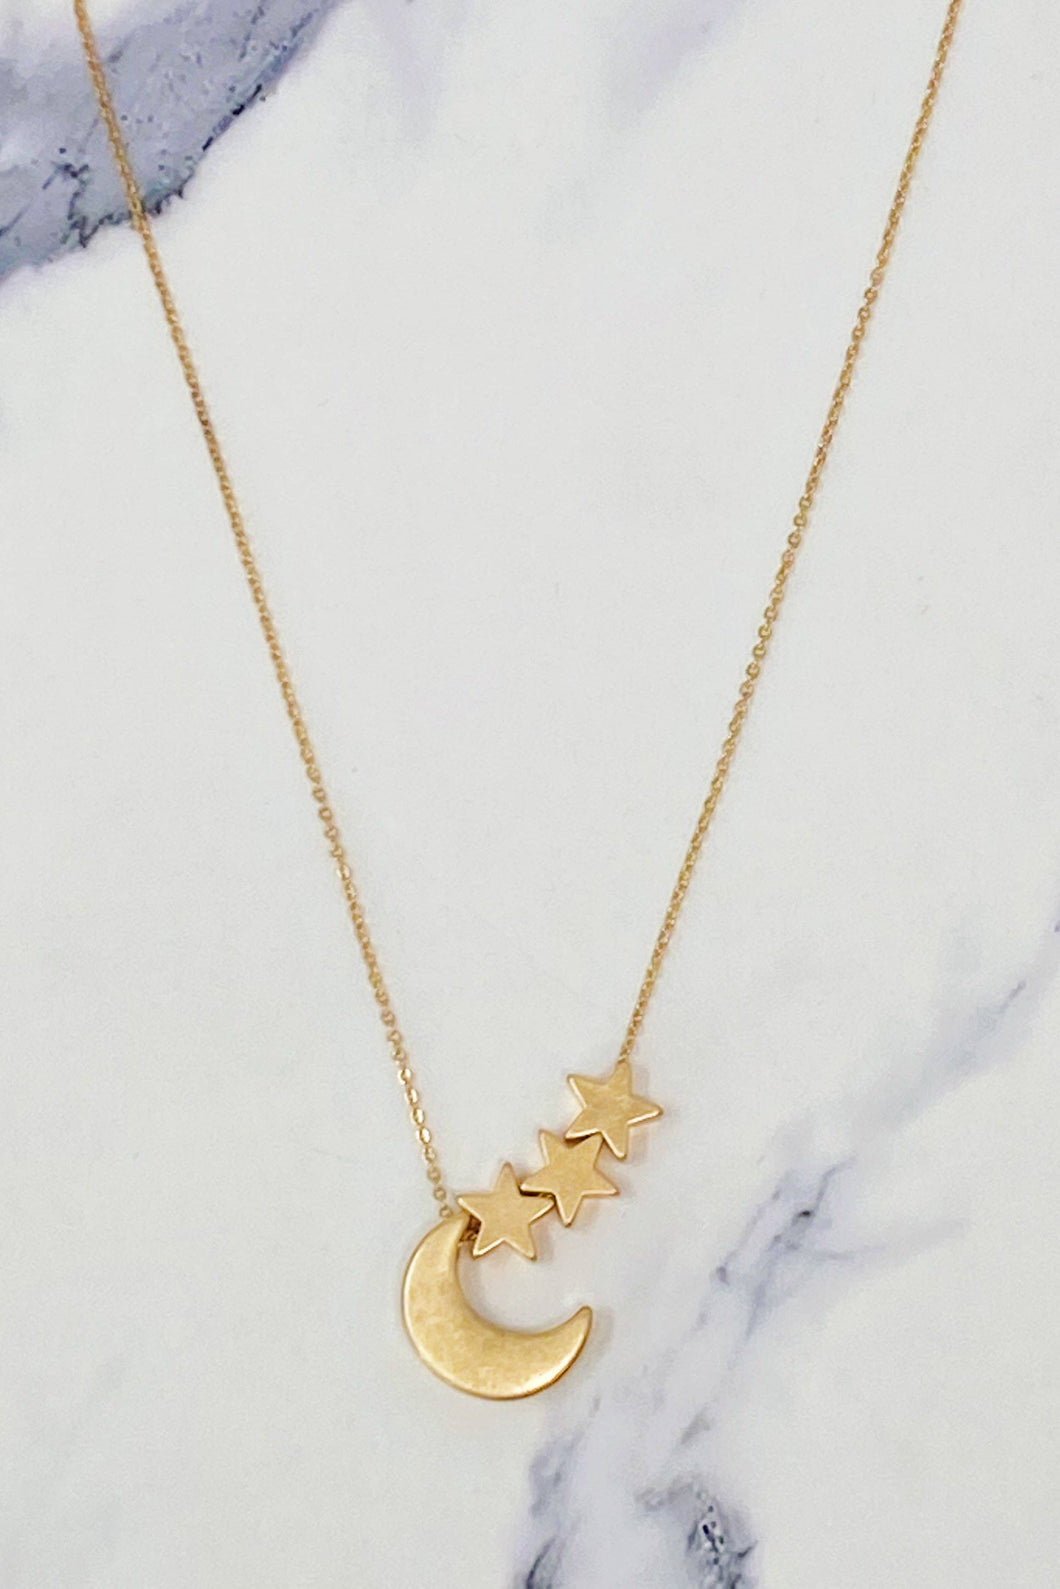 The Perfect Night Sky Necklace